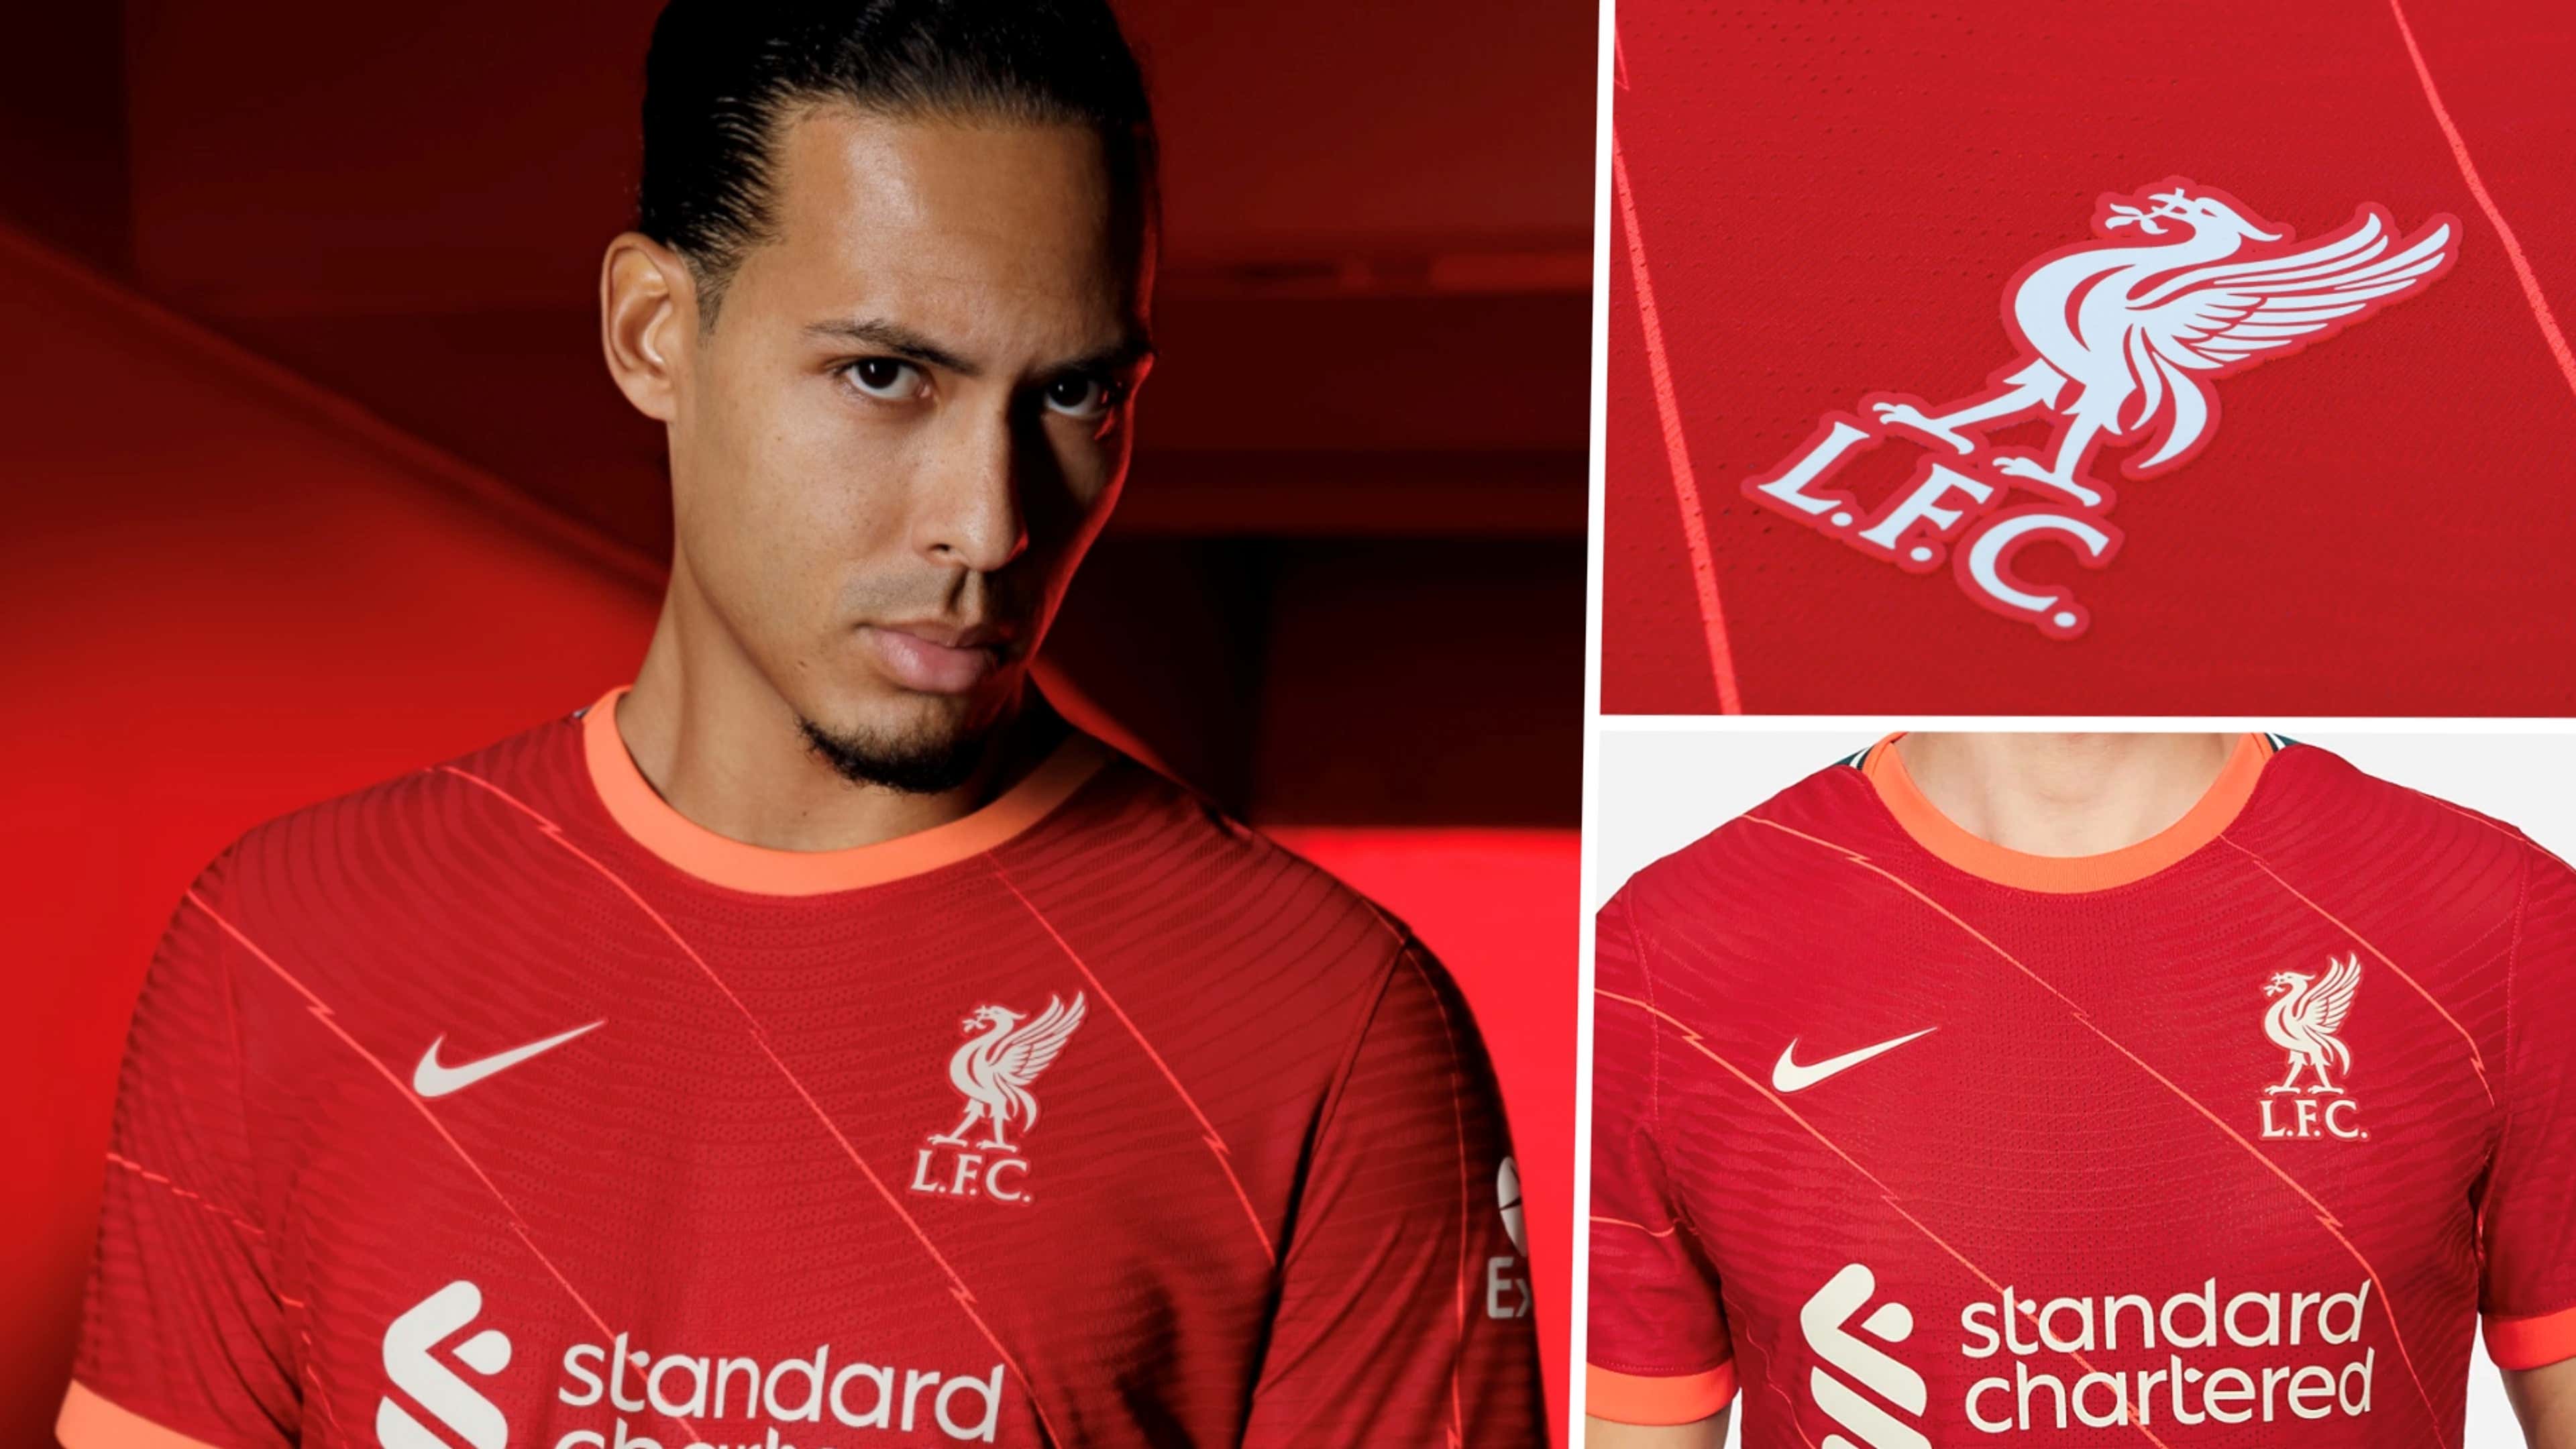 Liverpool FC reveal new 2021/22 home kit - made from 100% recycled